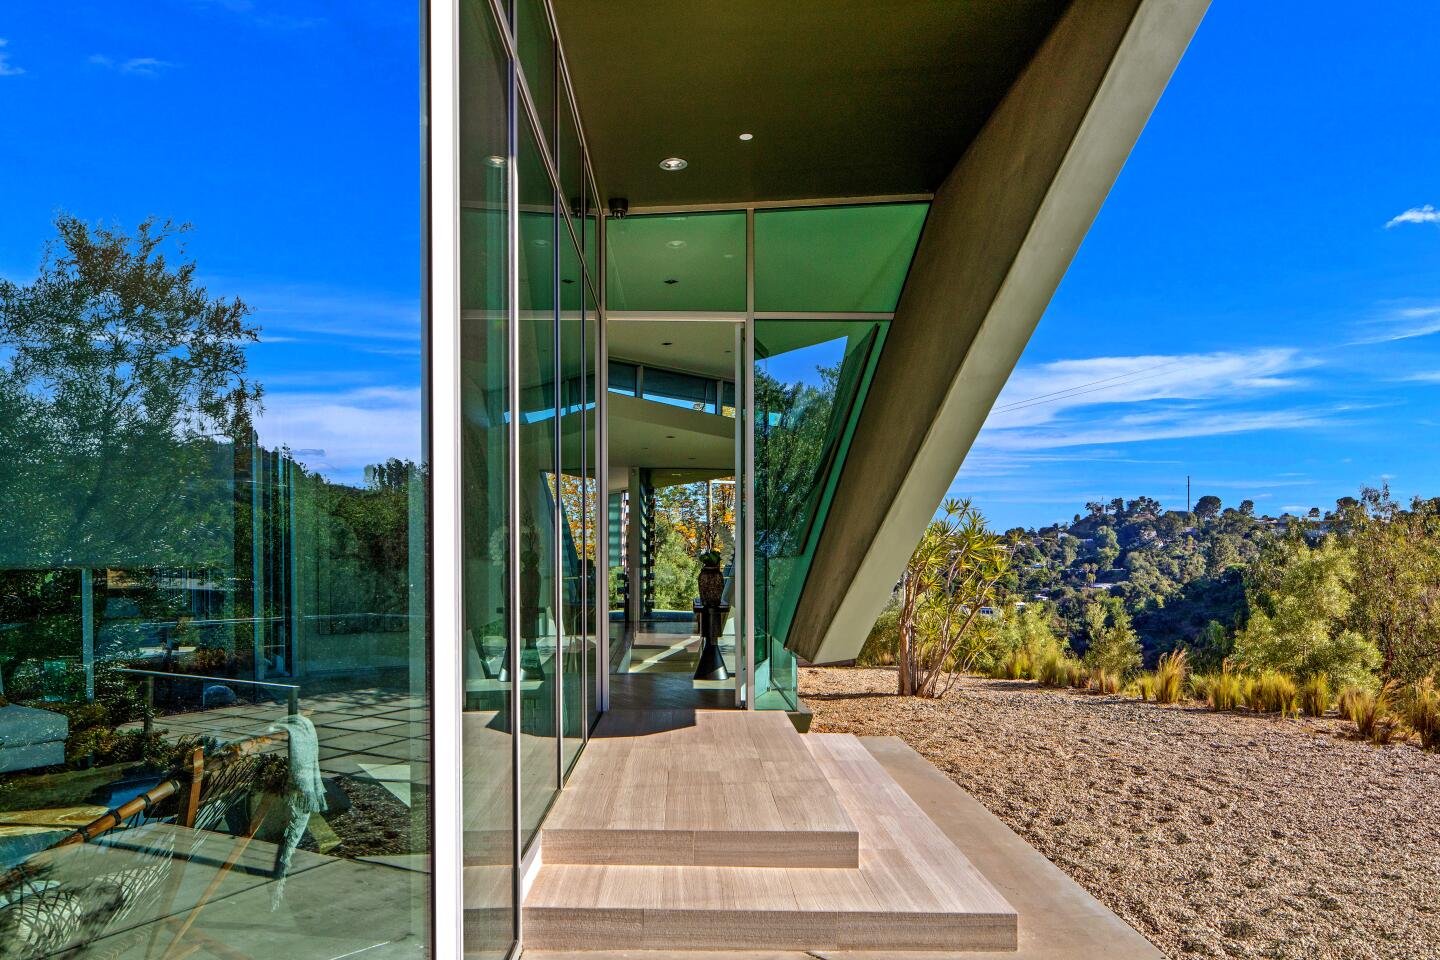 The dramatic Hollywood Hills home of musician Pharrell was designed by Hagy Belzberg and completed in 2007.